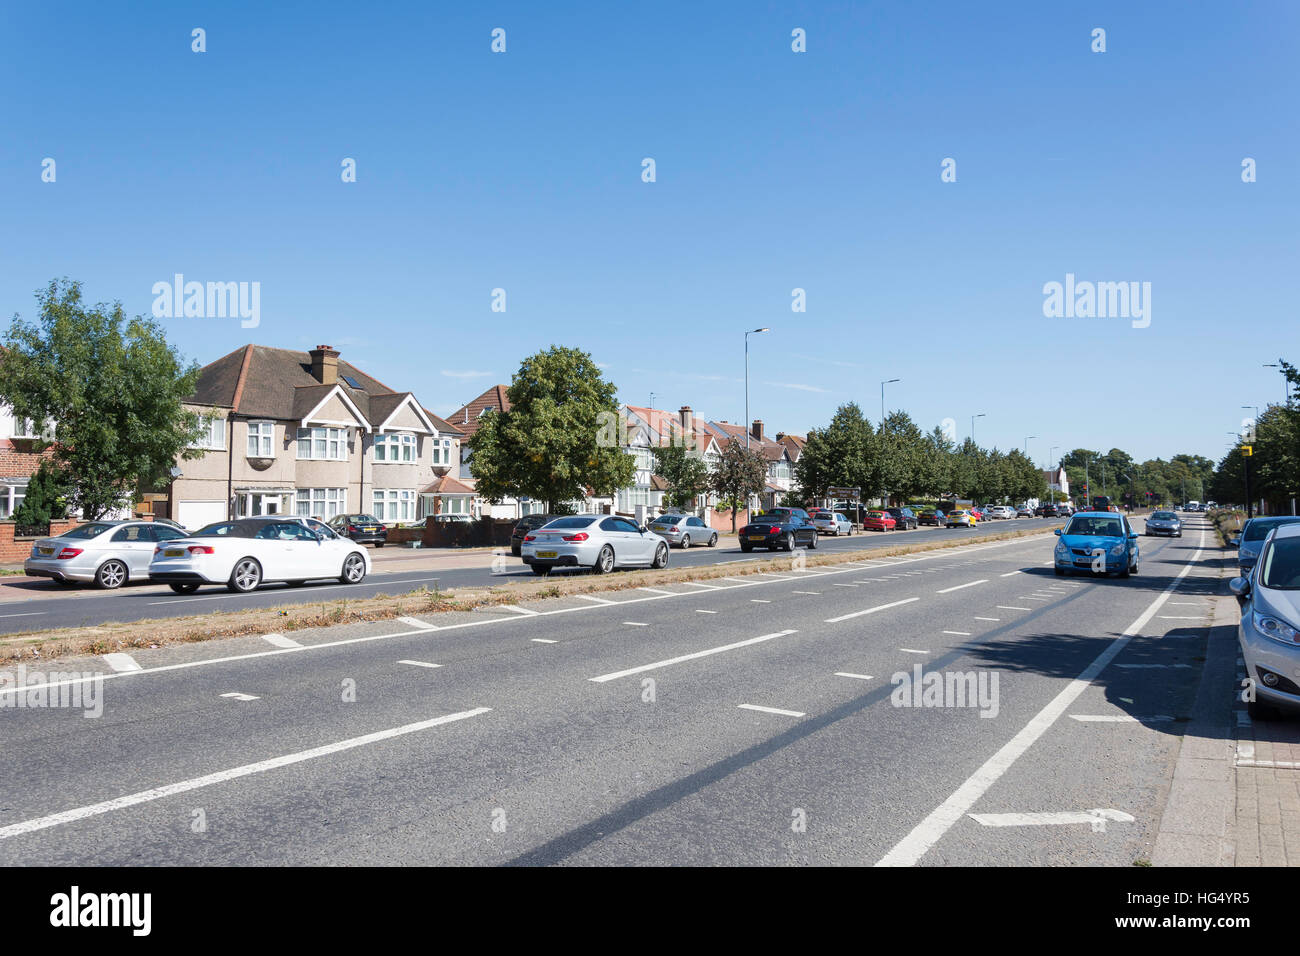 Great West Road (A4), Osterley, London Borough di Hounslow, Greater London, England, Regno Unito Foto Stock